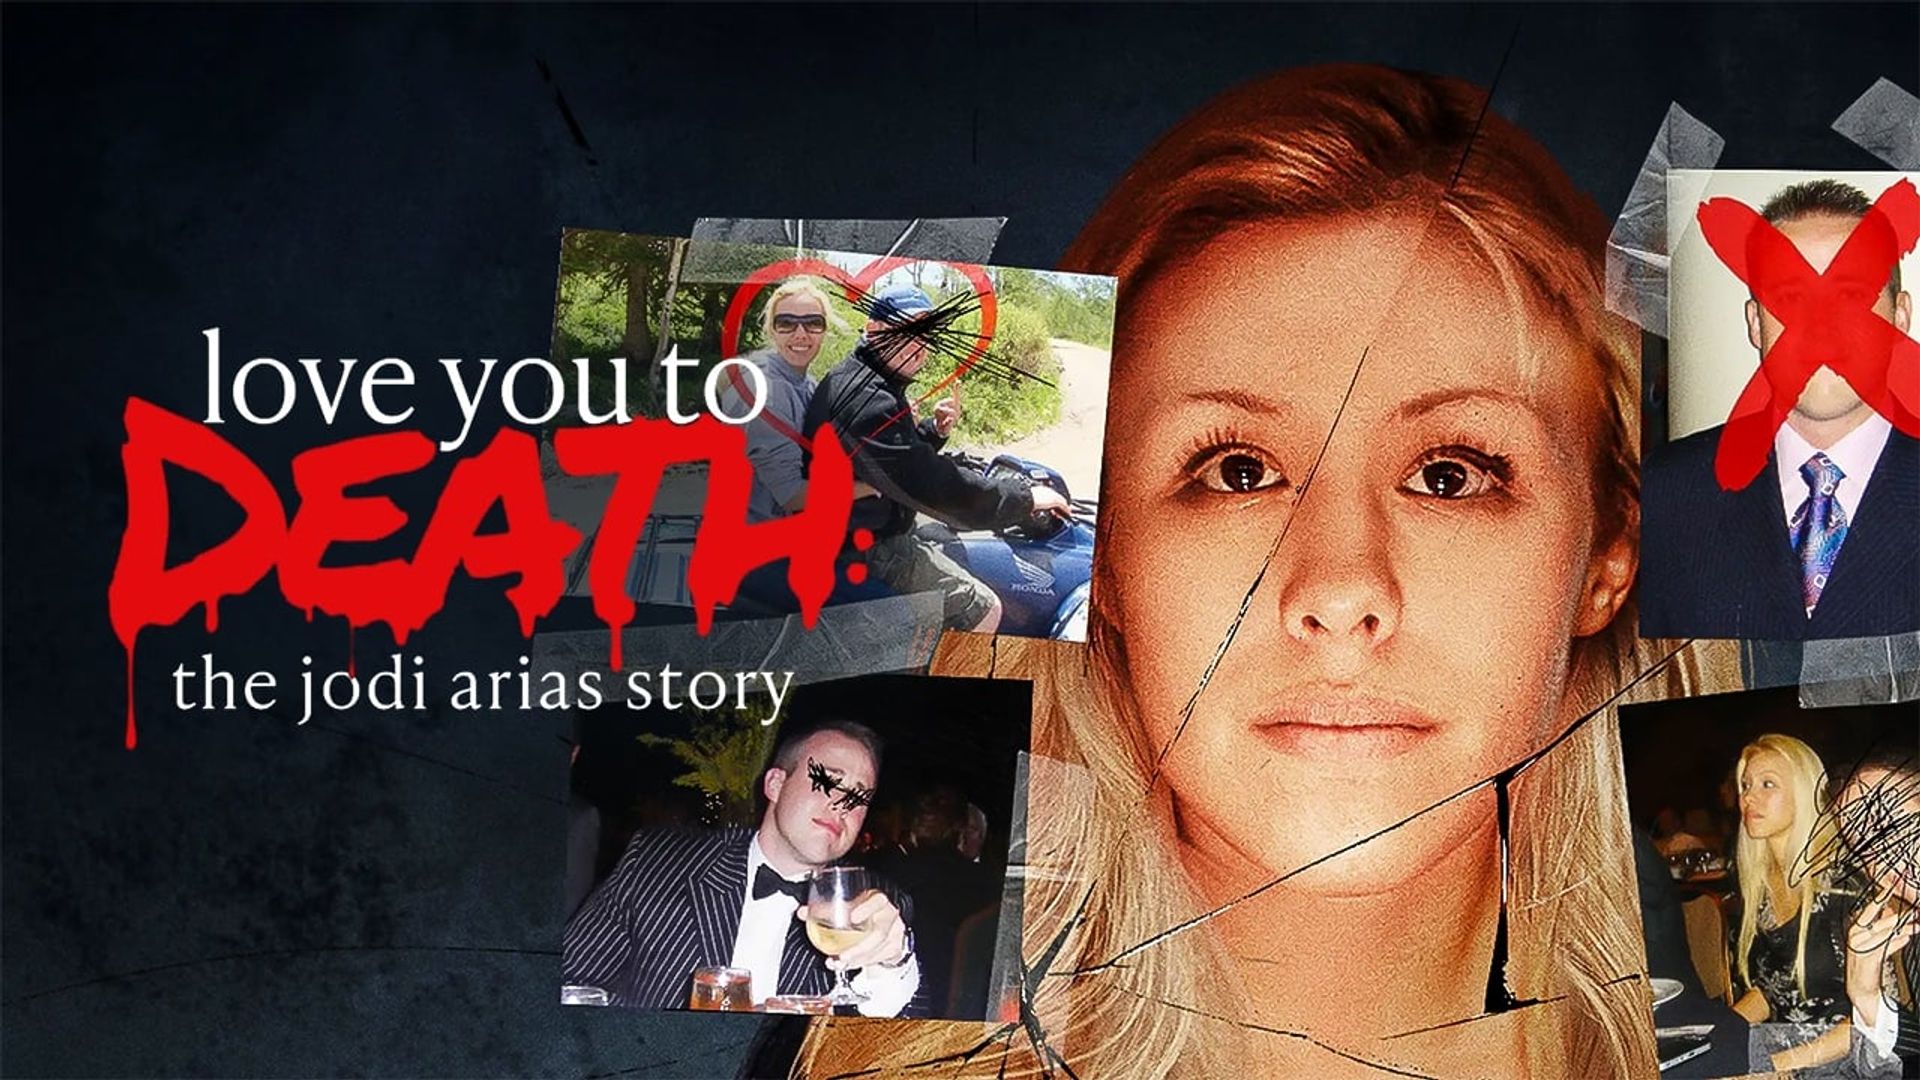 Love You to Death: The Jodi Arias Story background